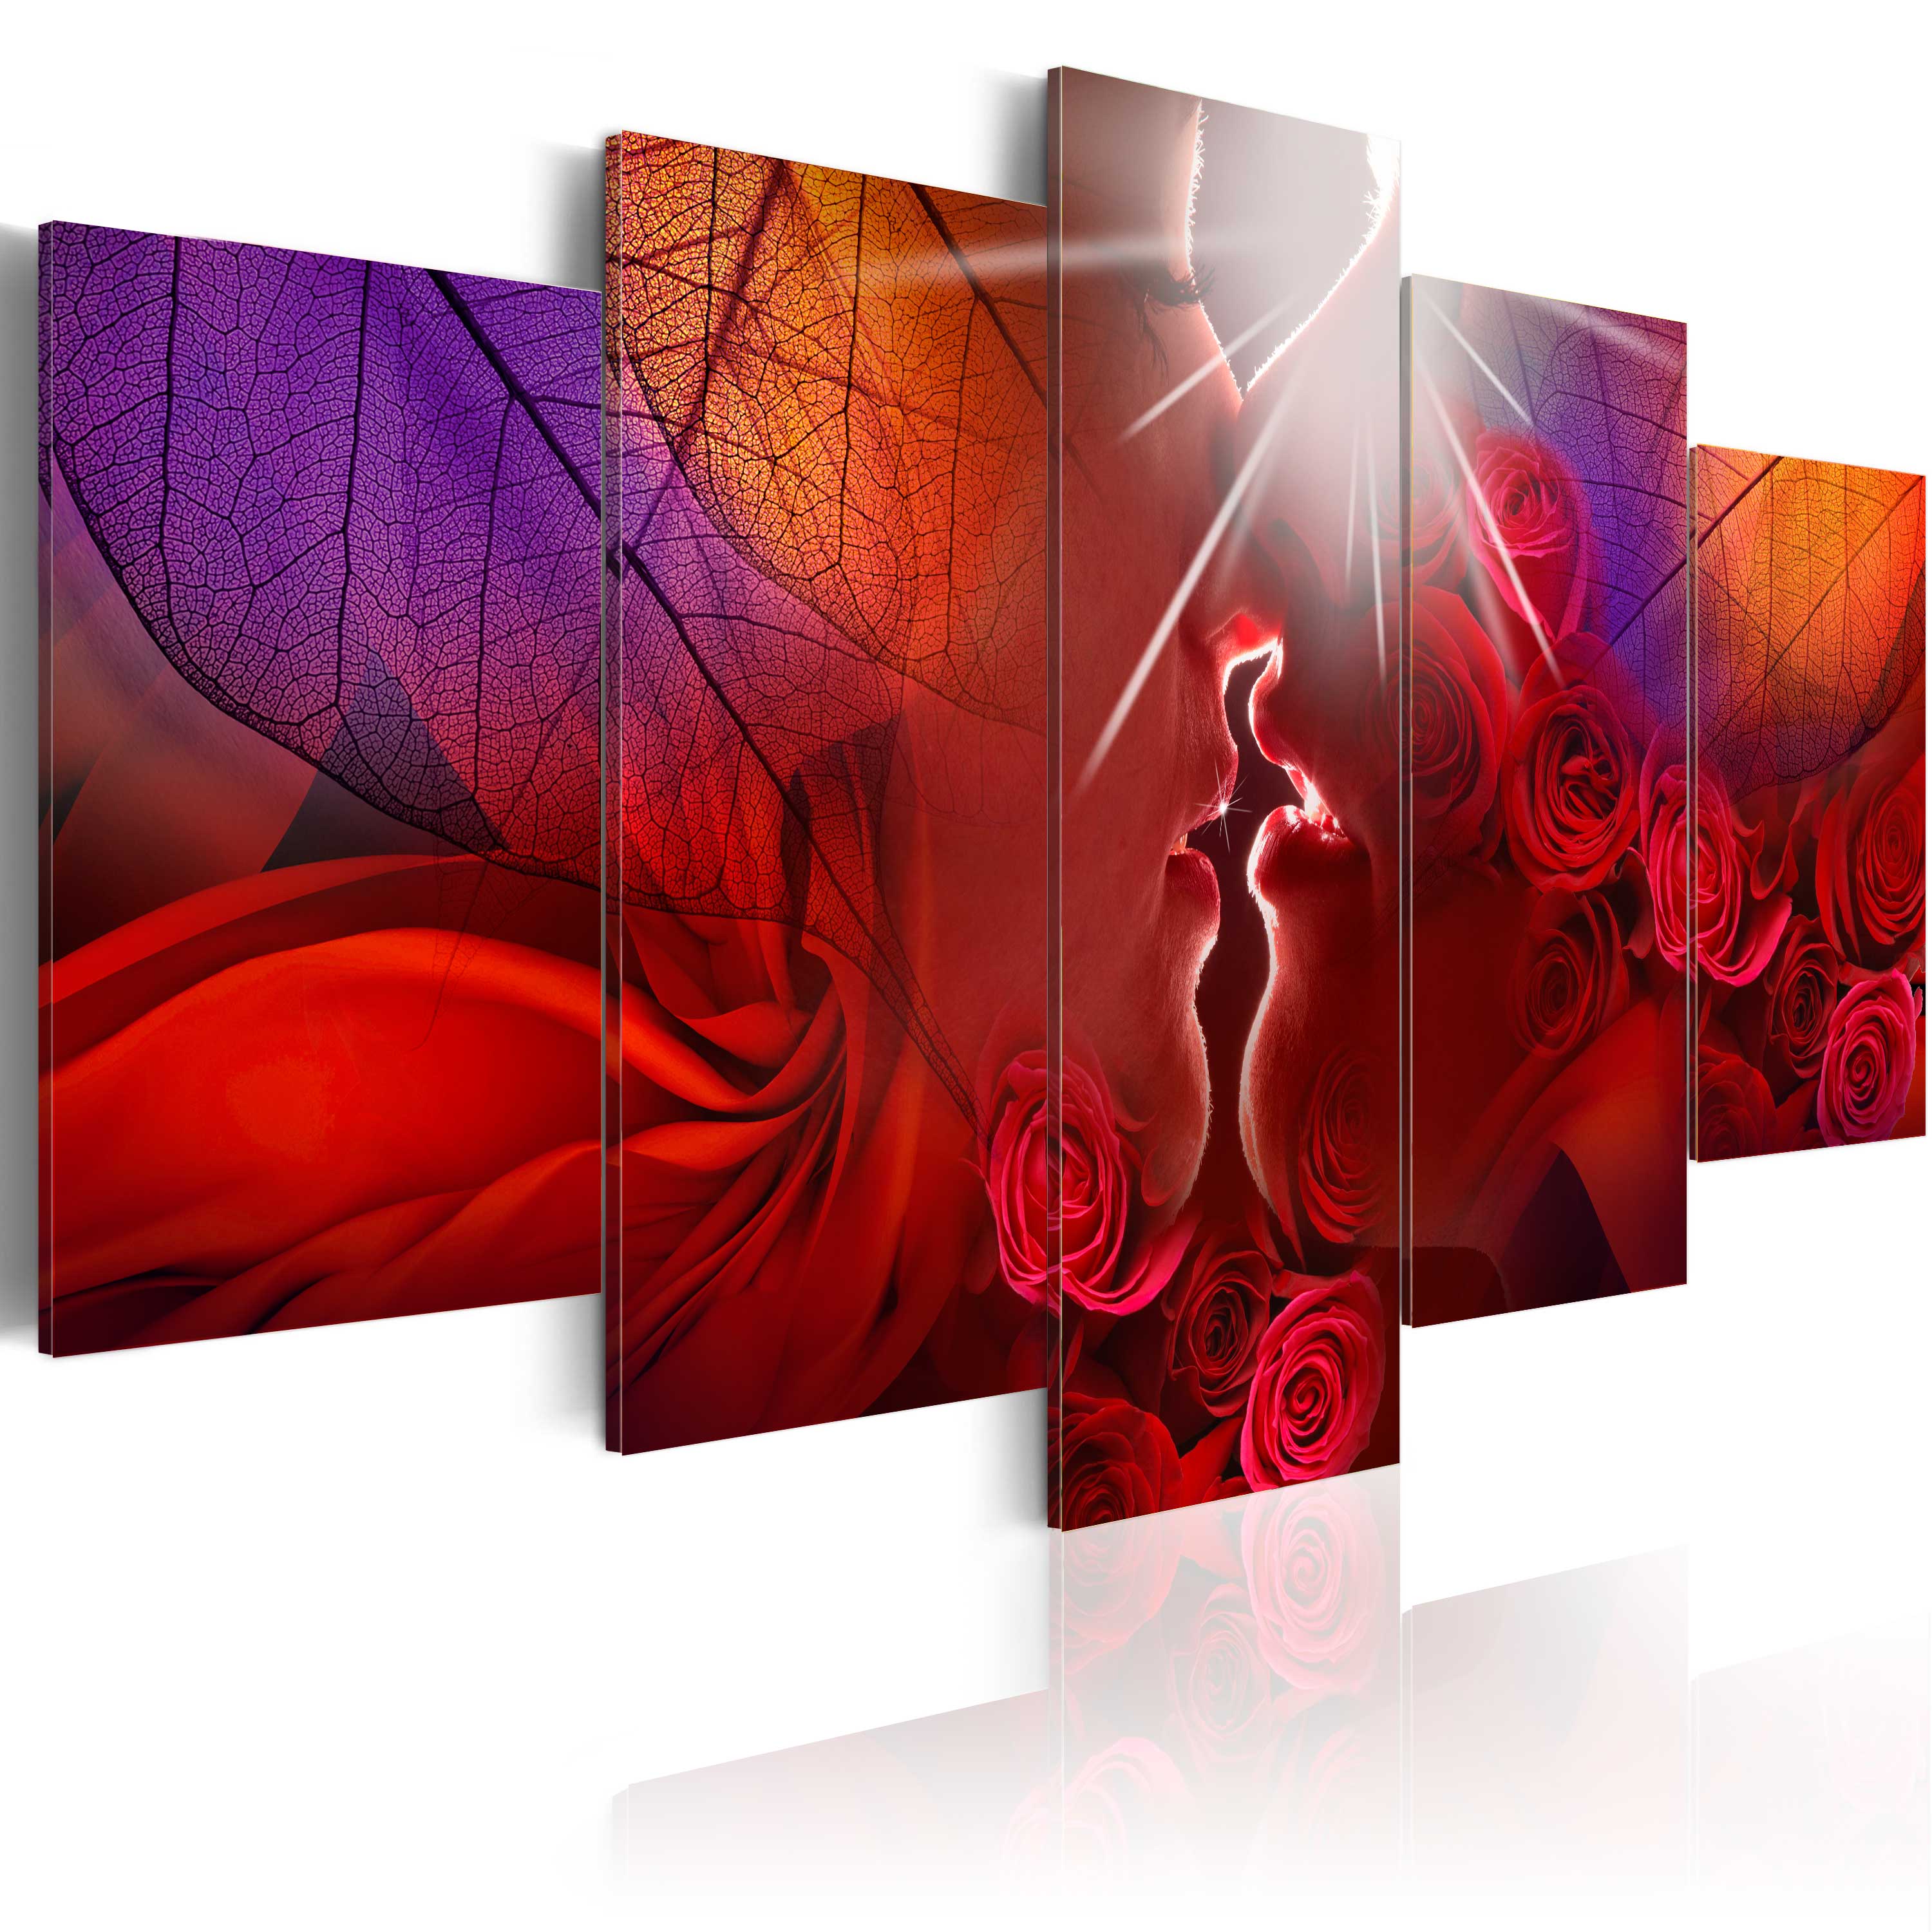 Canvas Print - Kiss from rose - 200x100